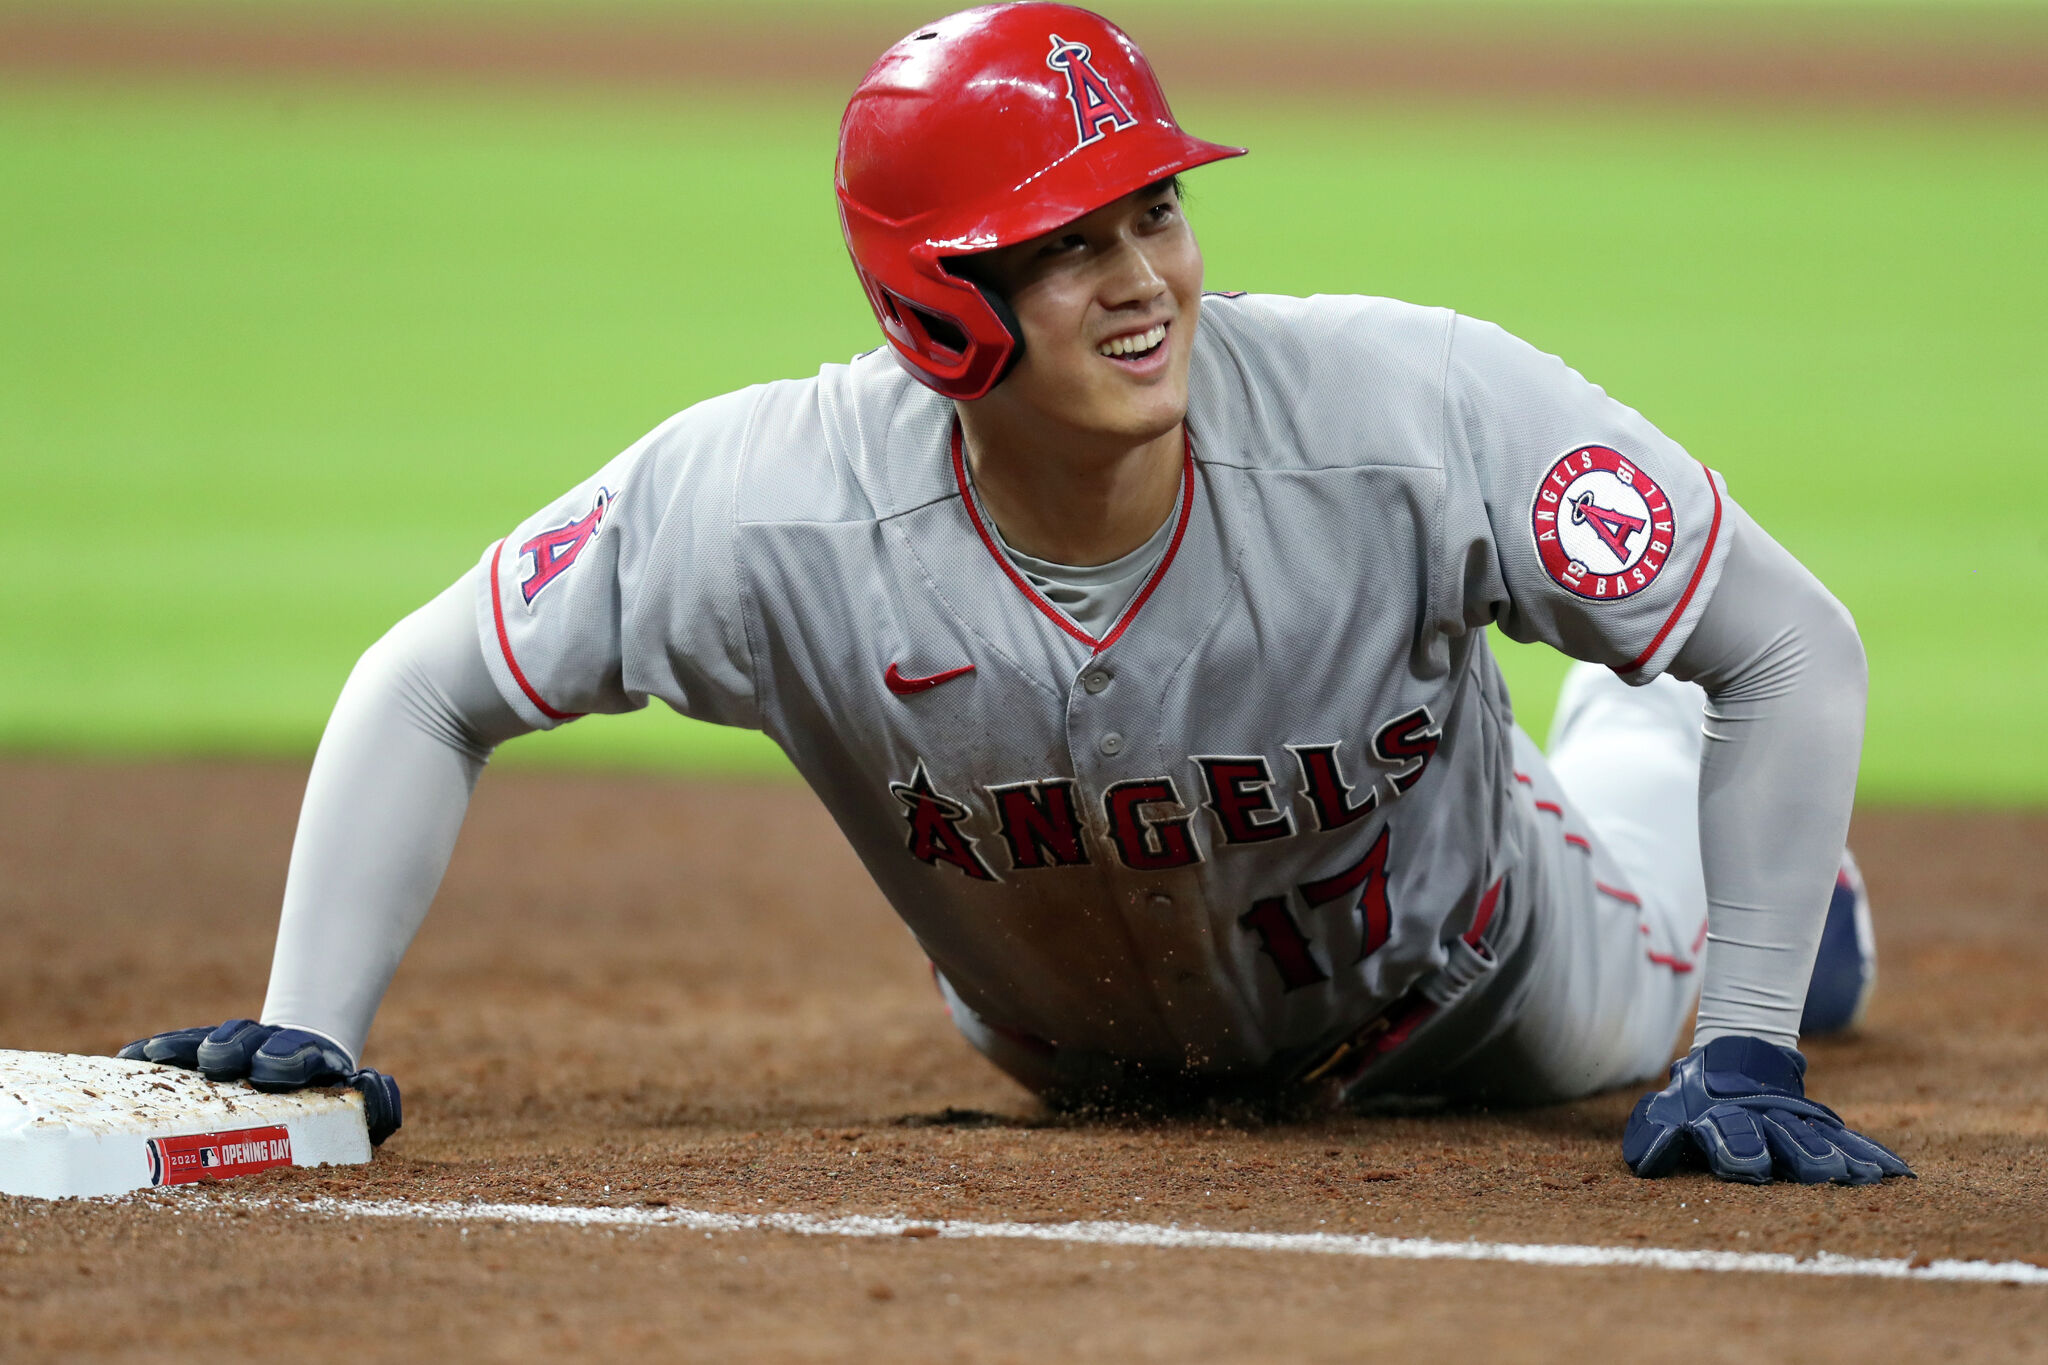 Shohei Ohtani trade: The case for and case against the Angels